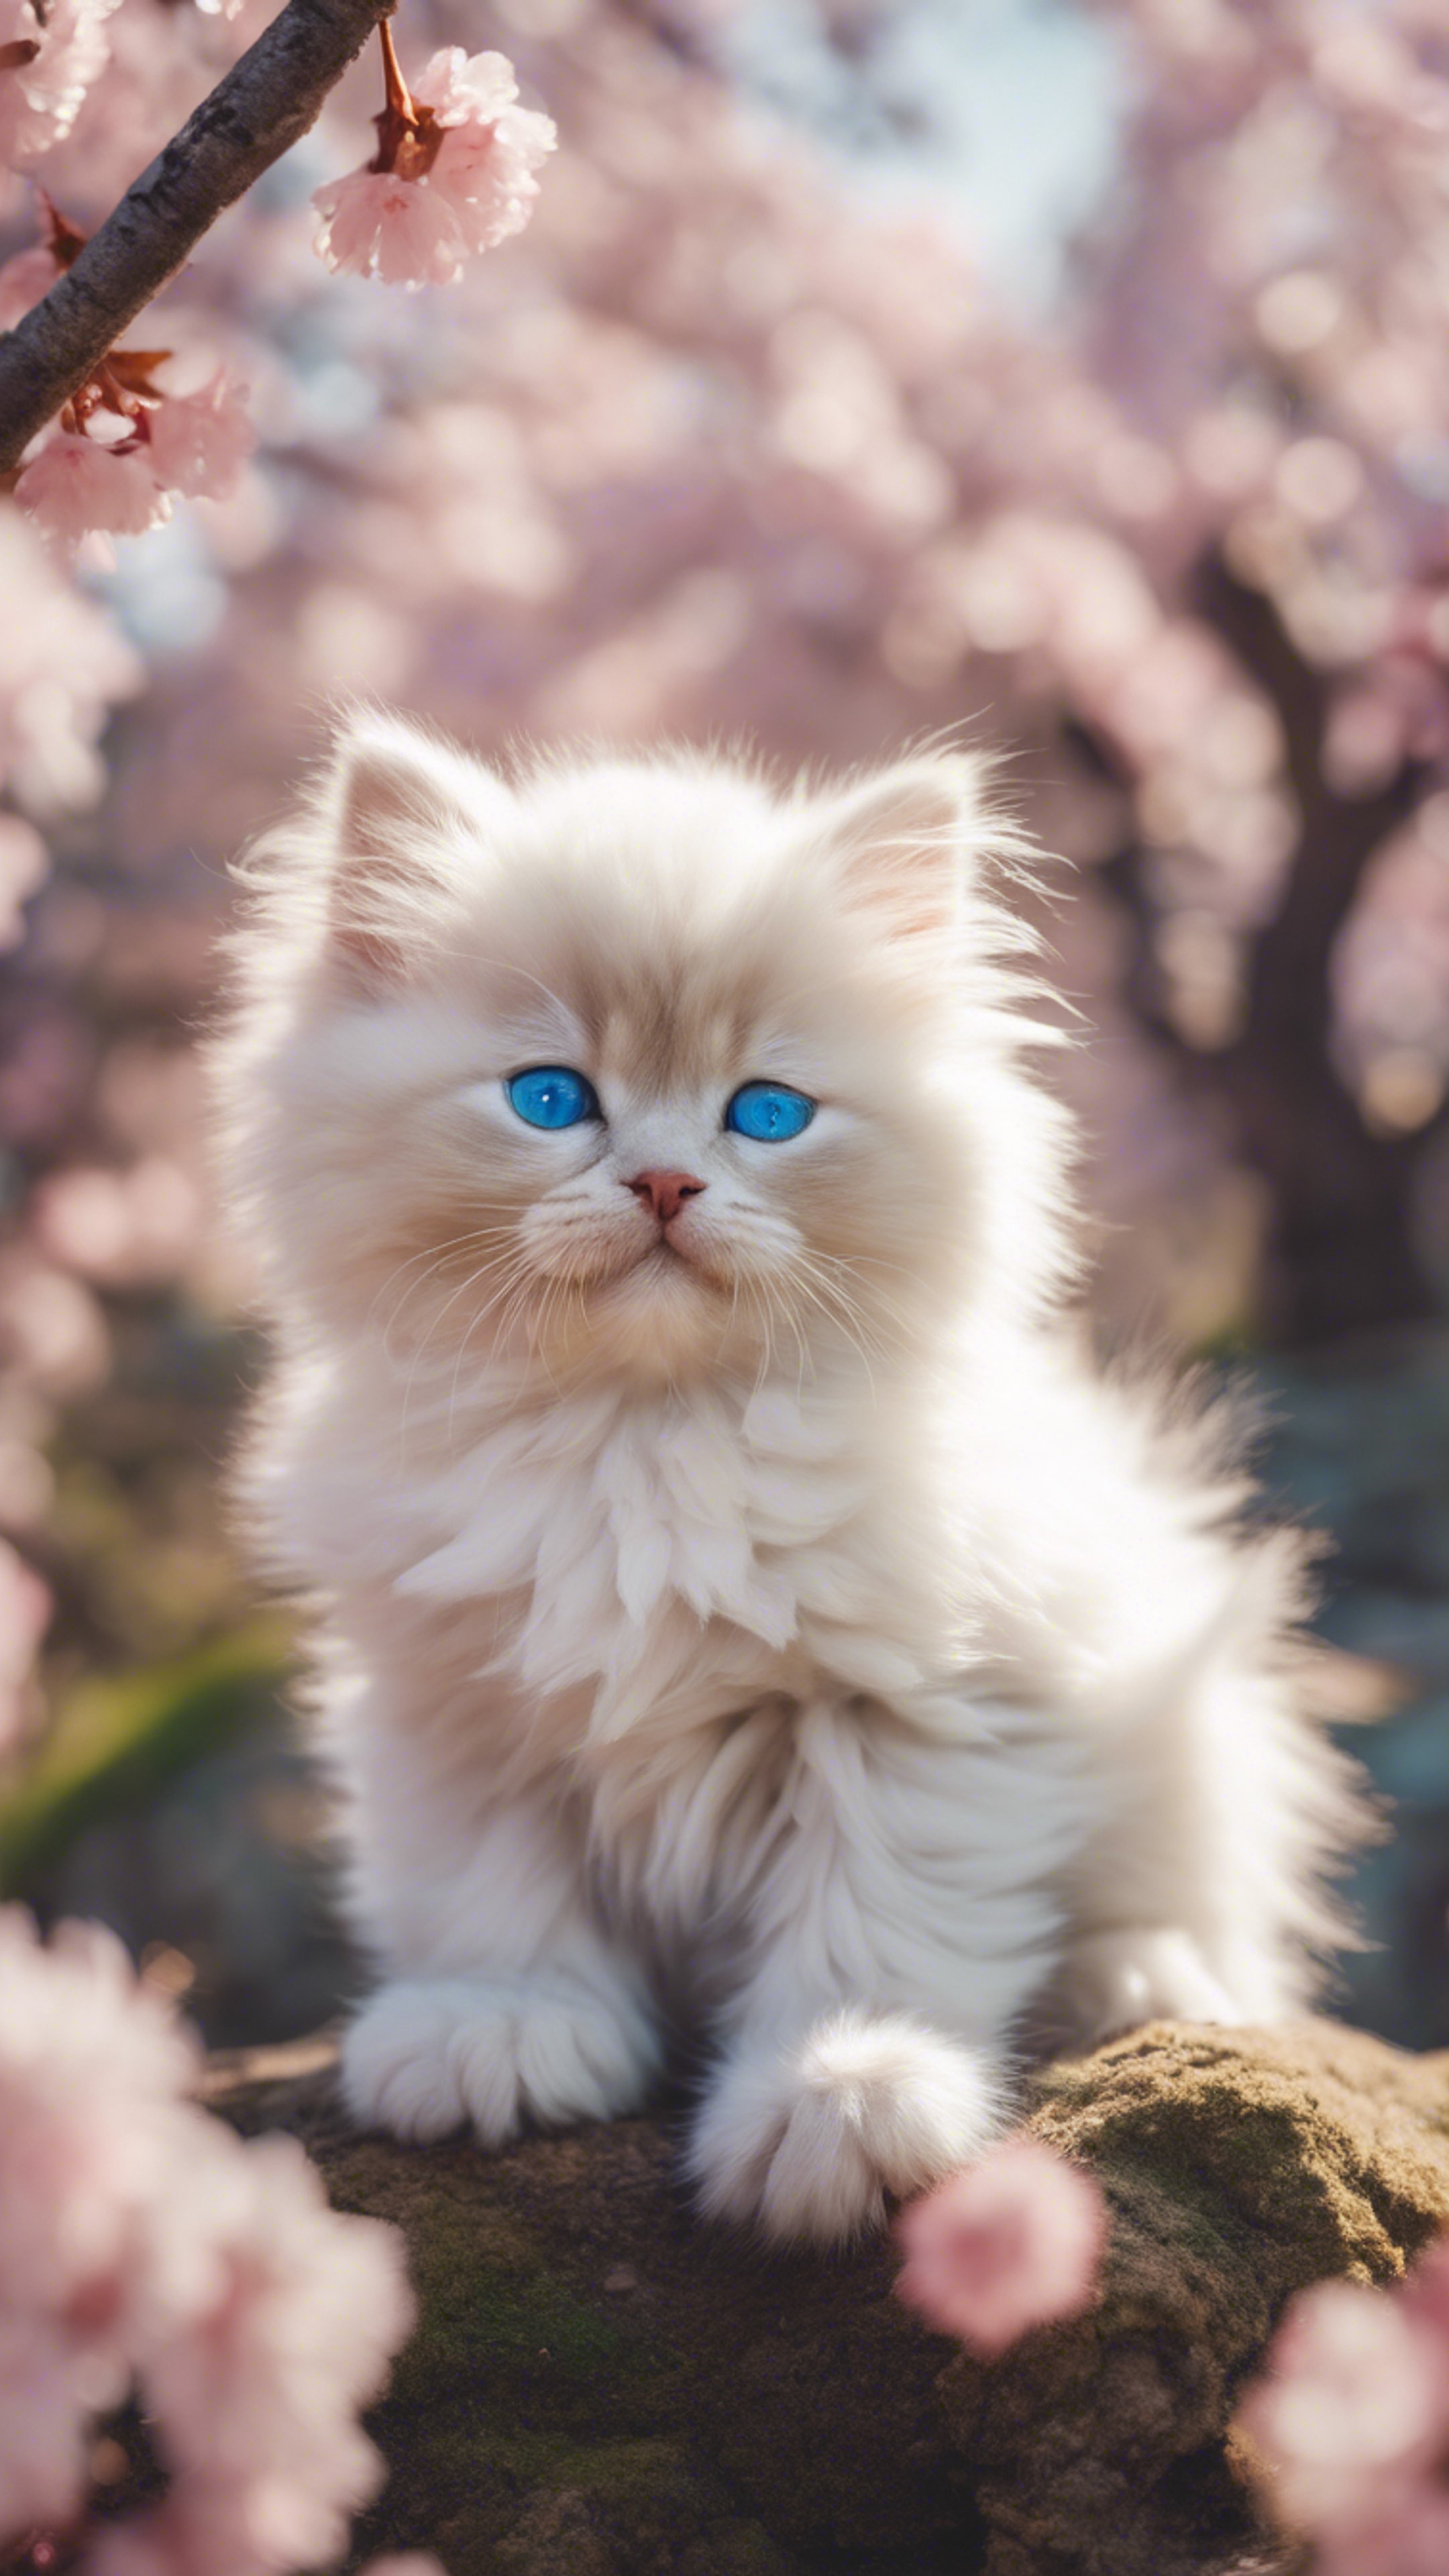 A fluffy Himalayan kitten with blue eyes, blissfully sleeping in a cherry blossom-filled Japanese garden in springtime.壁紙[7574b48ca53a4fd7b91a]